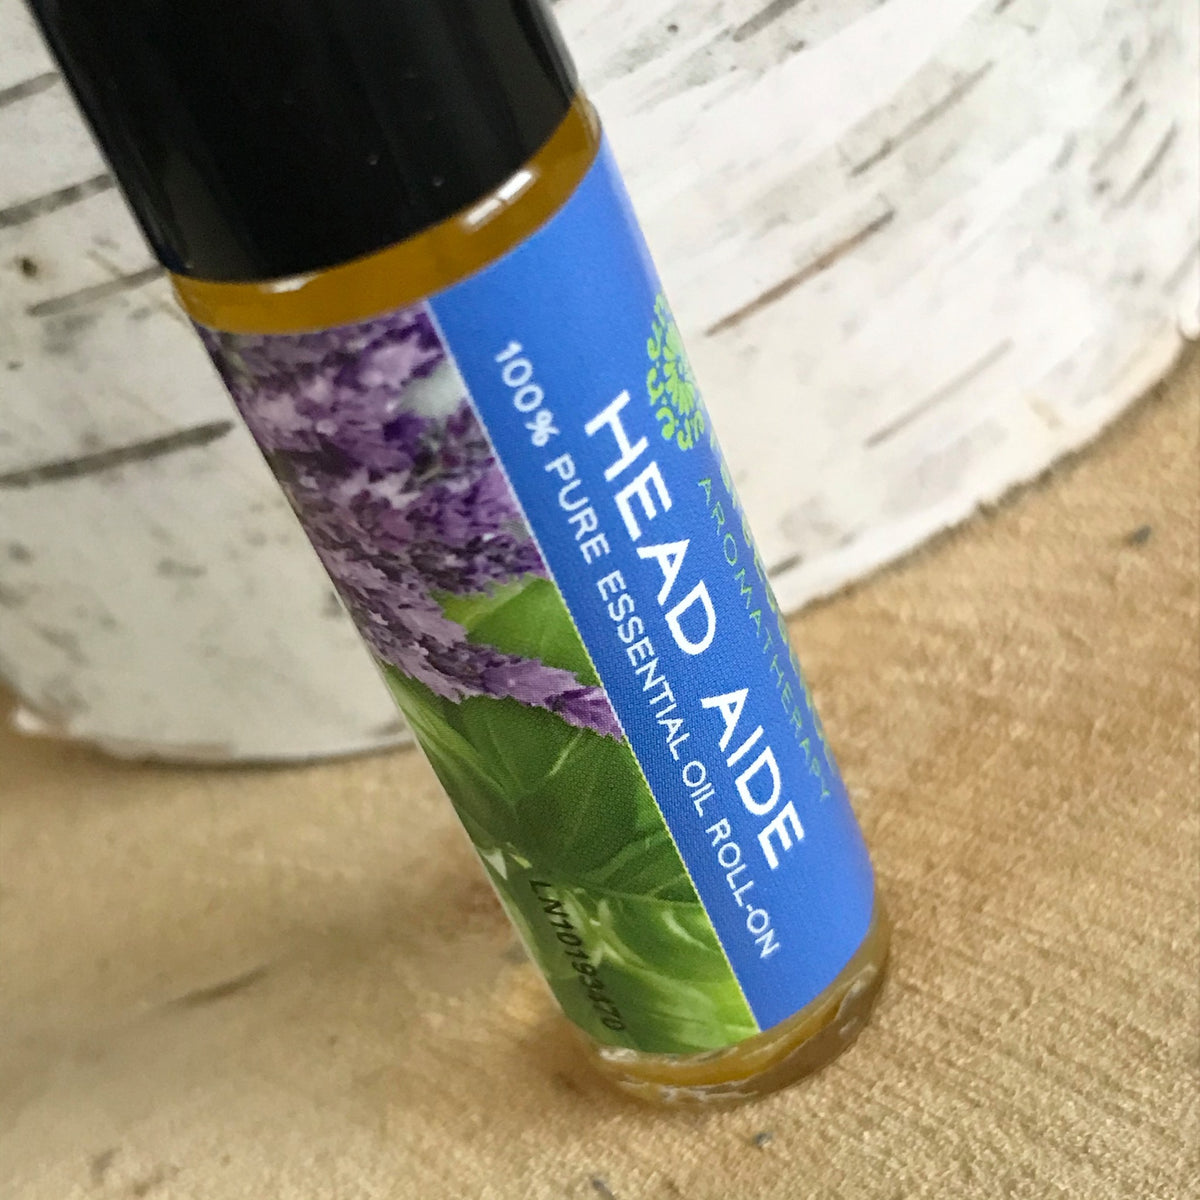 Chamomile, lavender, peppermint, and basil essential oils are some of the ingredients in this roll-on that help calm and fight off headaches and nausea.